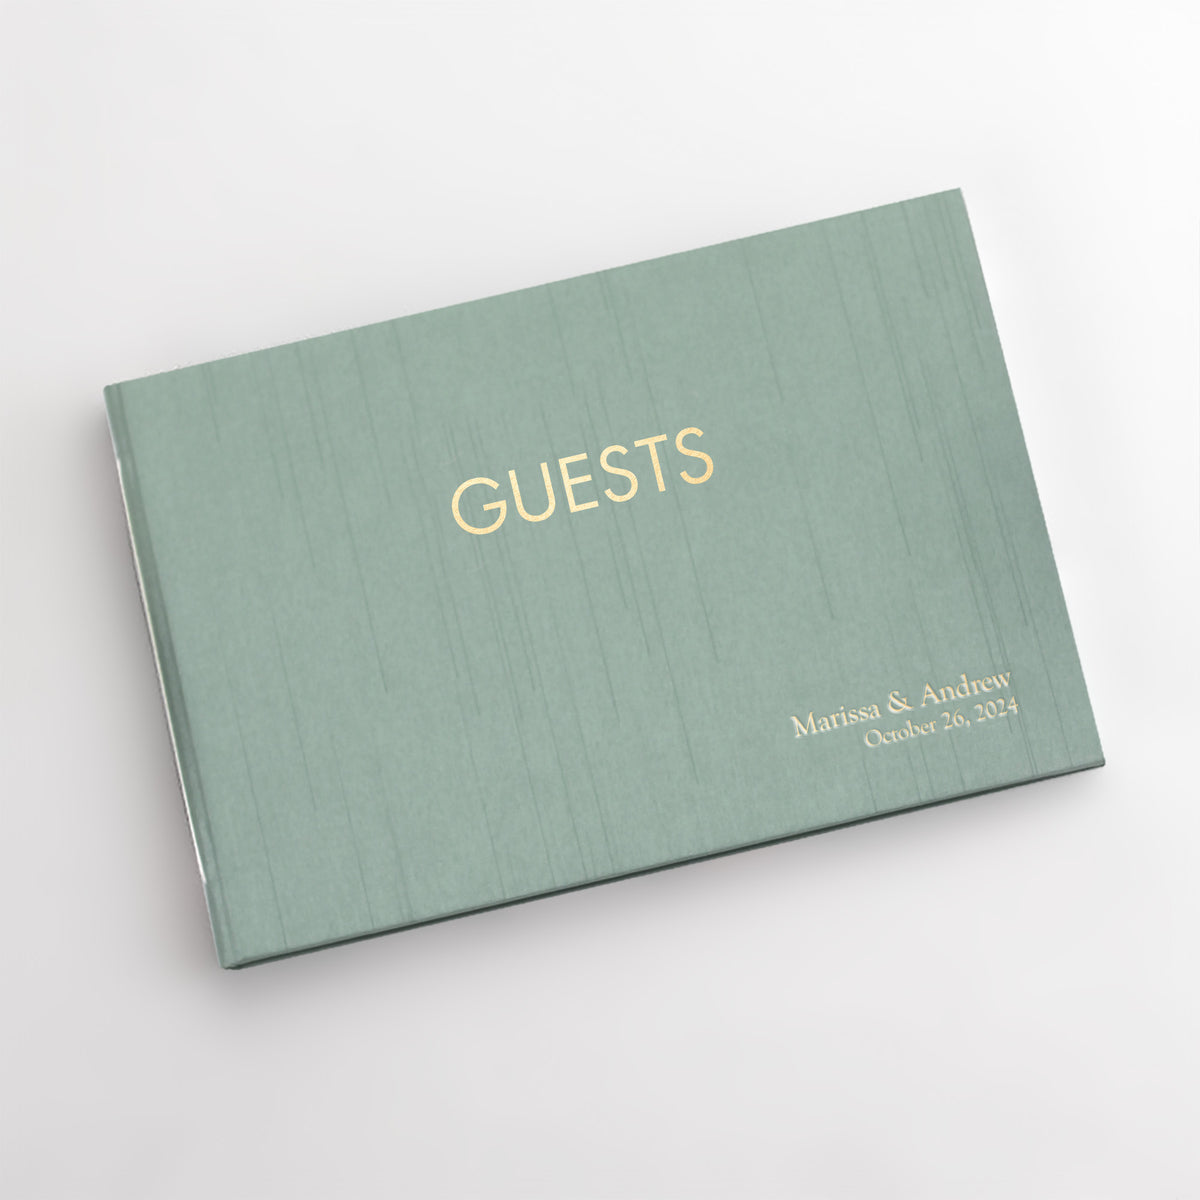 Guestbook Embossed with “Guests” | Cover: Misty Blue Silk | Available Personalized